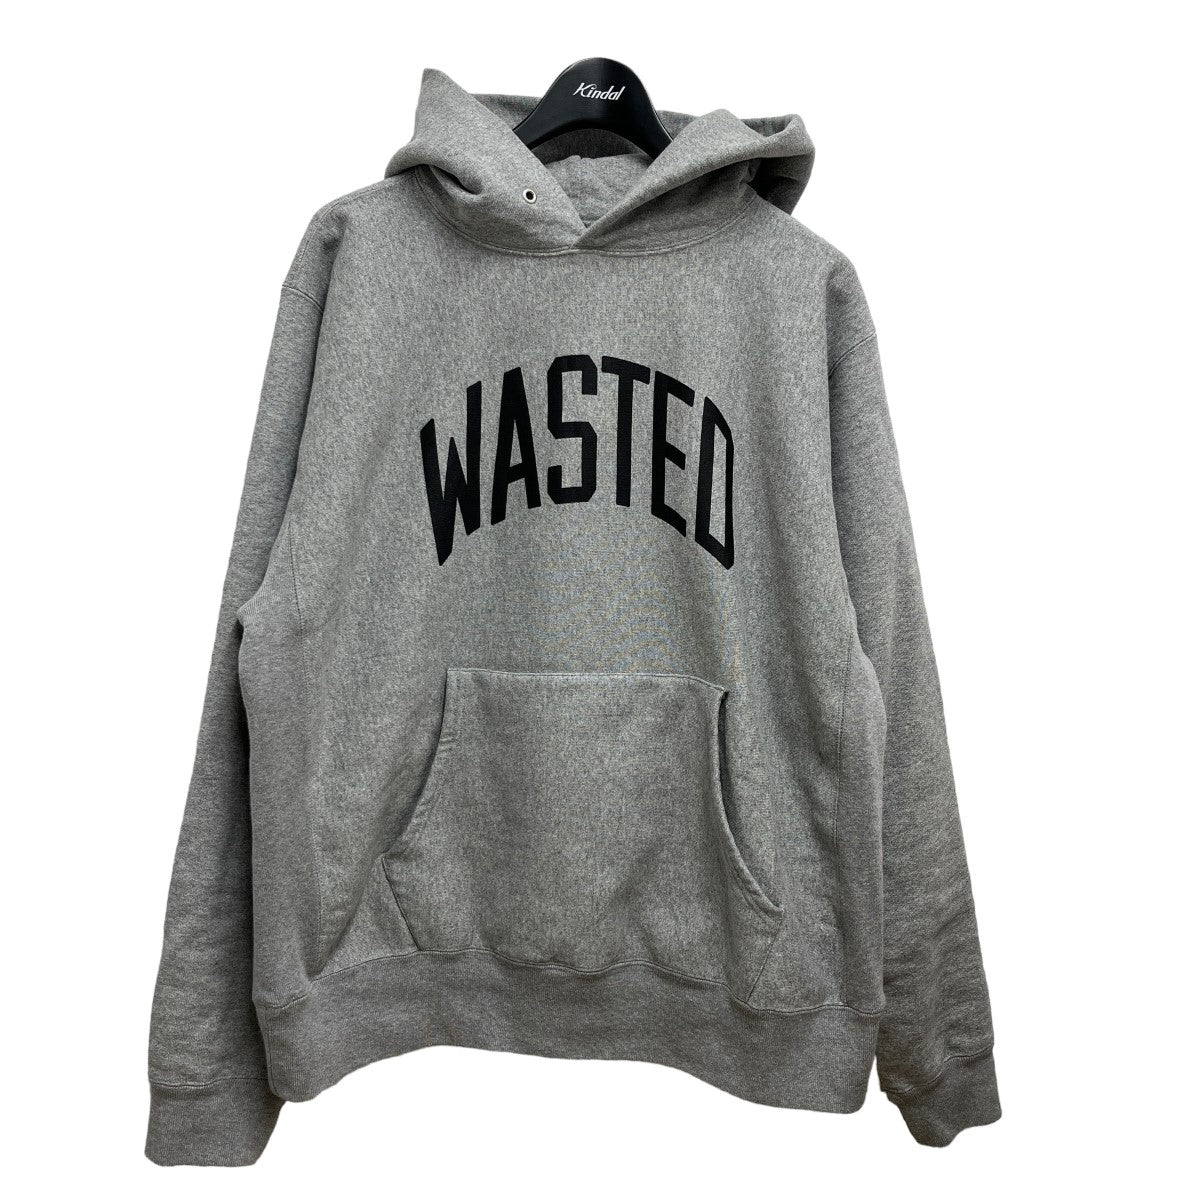 Wasted Youth HEAVY WEIGHT HOODIEwastedyouth